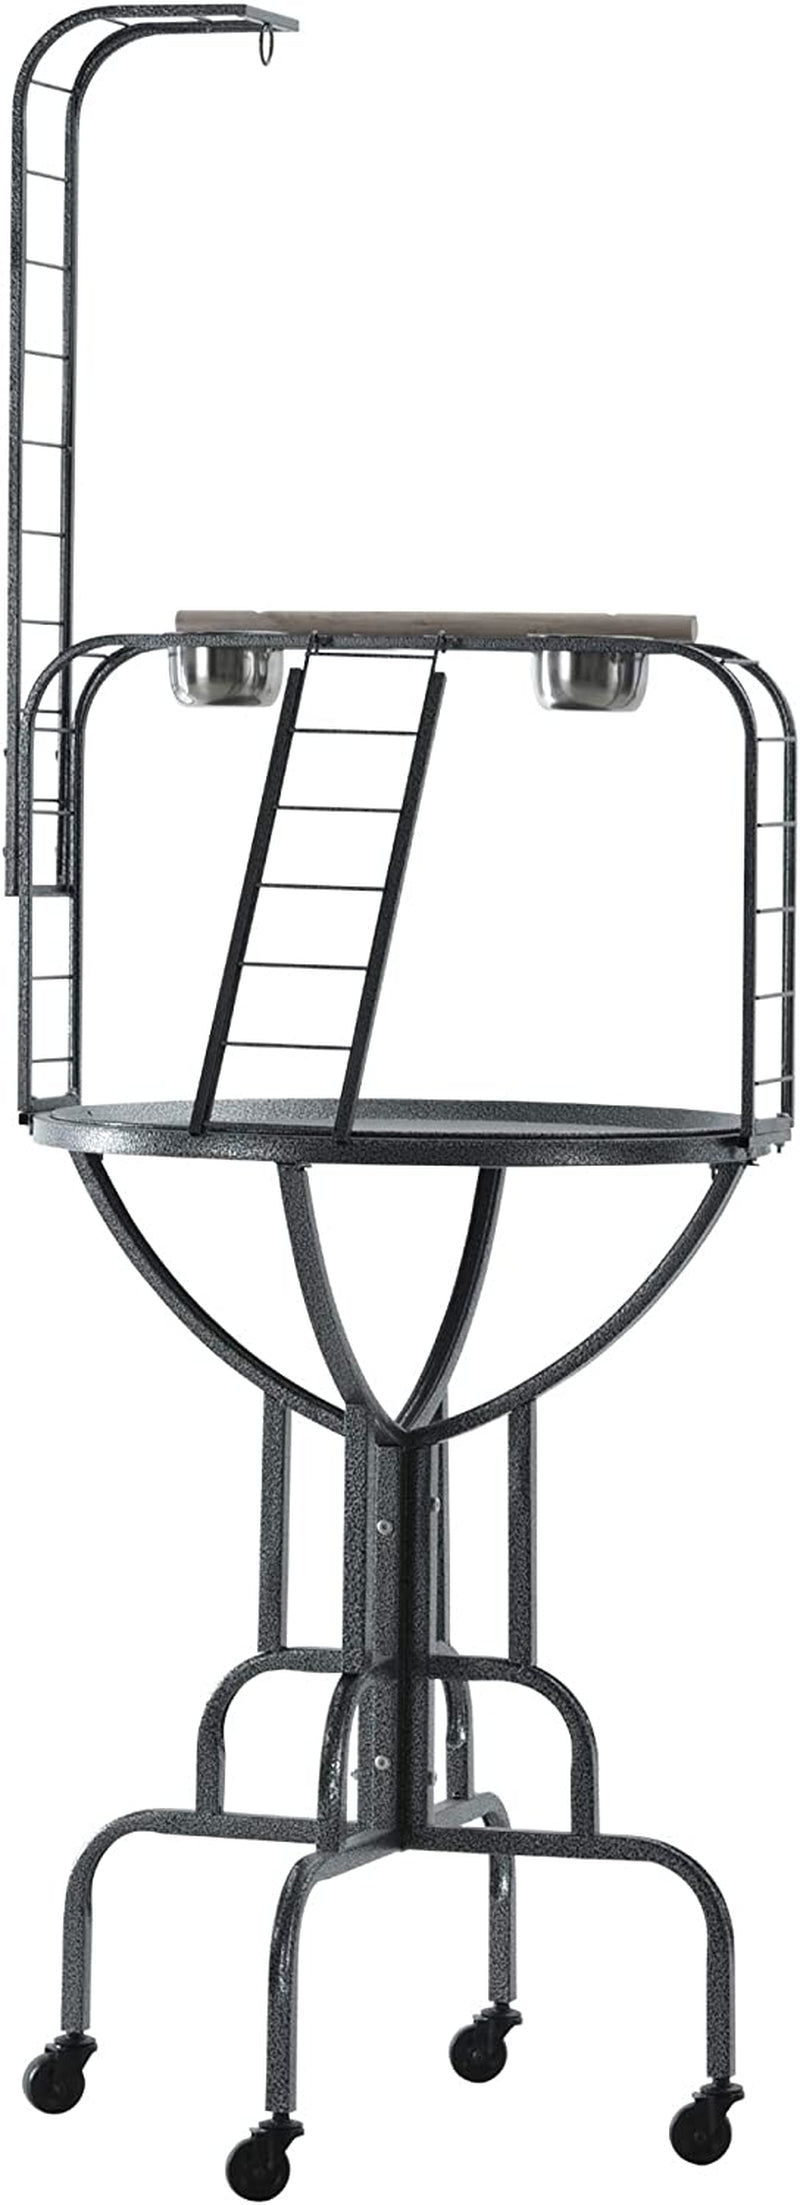 Pawhut Rolling Bird Perch Play Stand with Universal Wheels, Wooden Perch Ladders, & Stainless Steel Feeding Cups, Grey